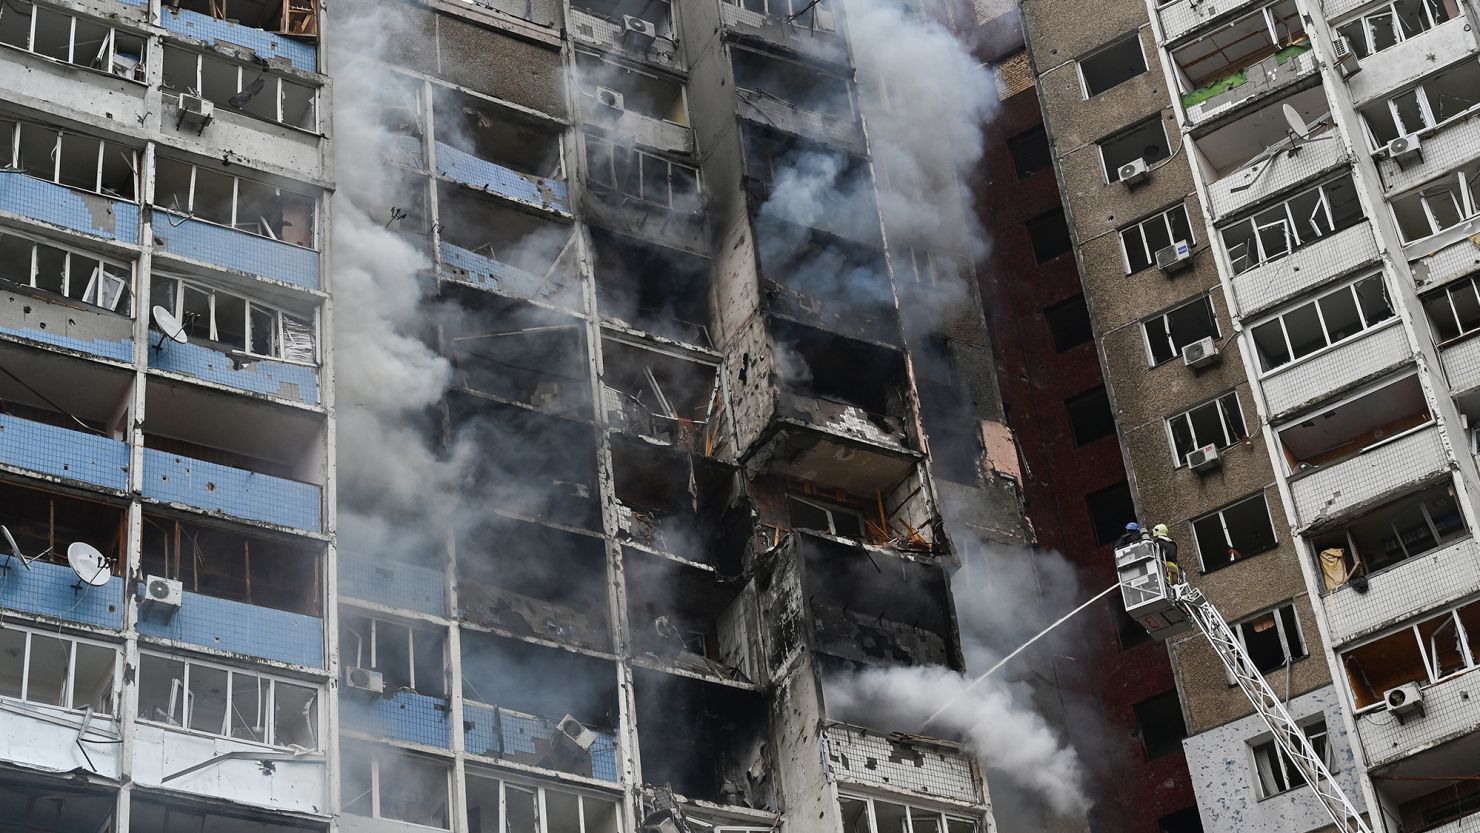 A residential building in Kyiv was hit in Russia's latest barrage of attacks Wednesday.